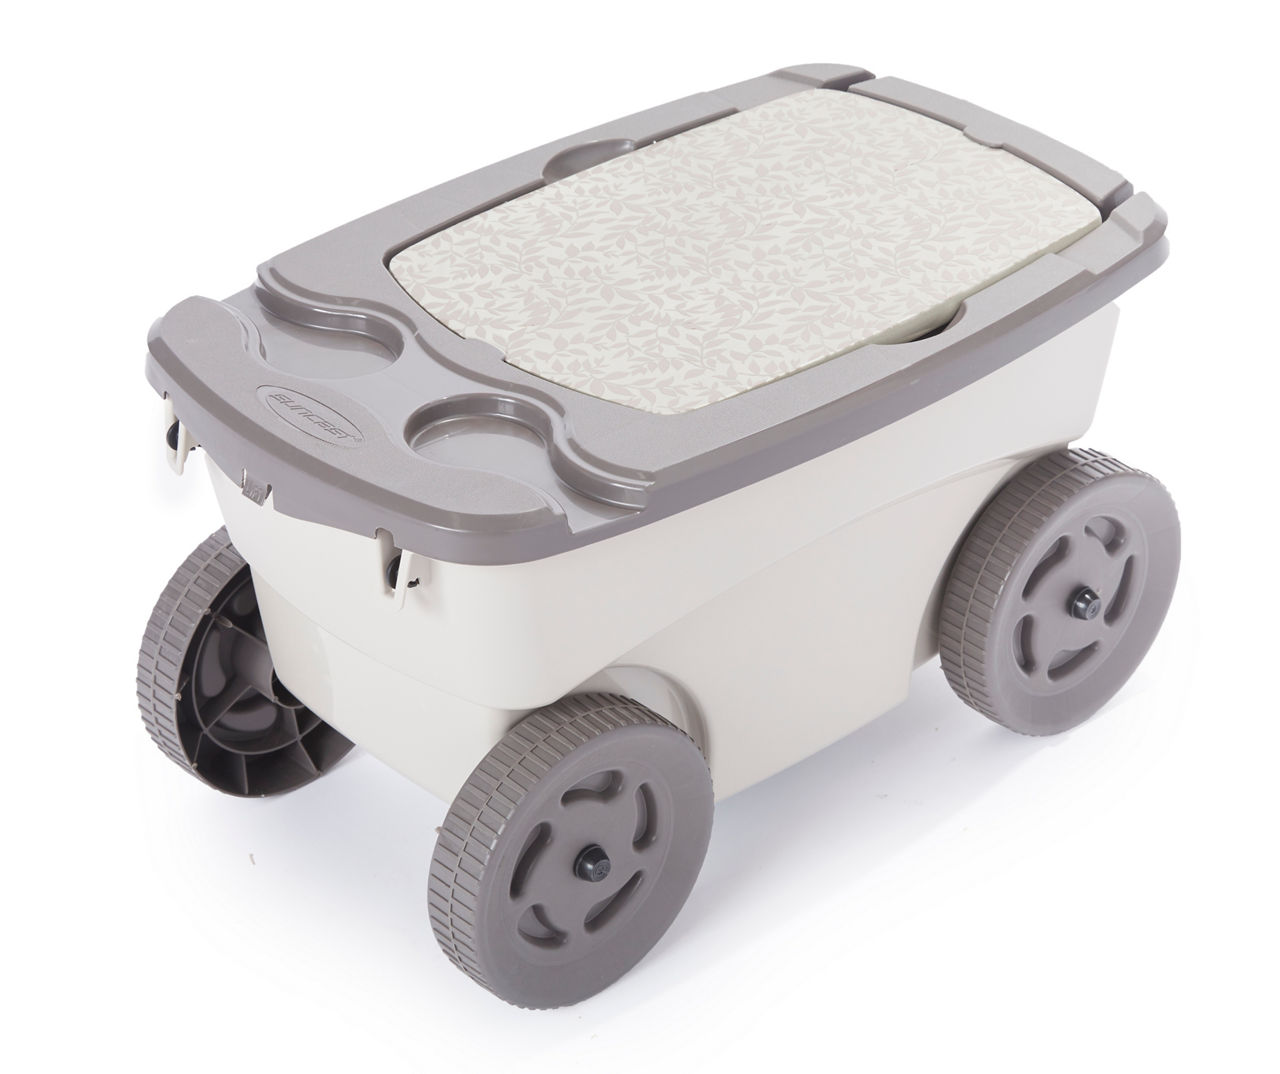 x 13 in Details about   Garden Scooter 12.25 in Resin Portable White with Built-In Cup Holders 